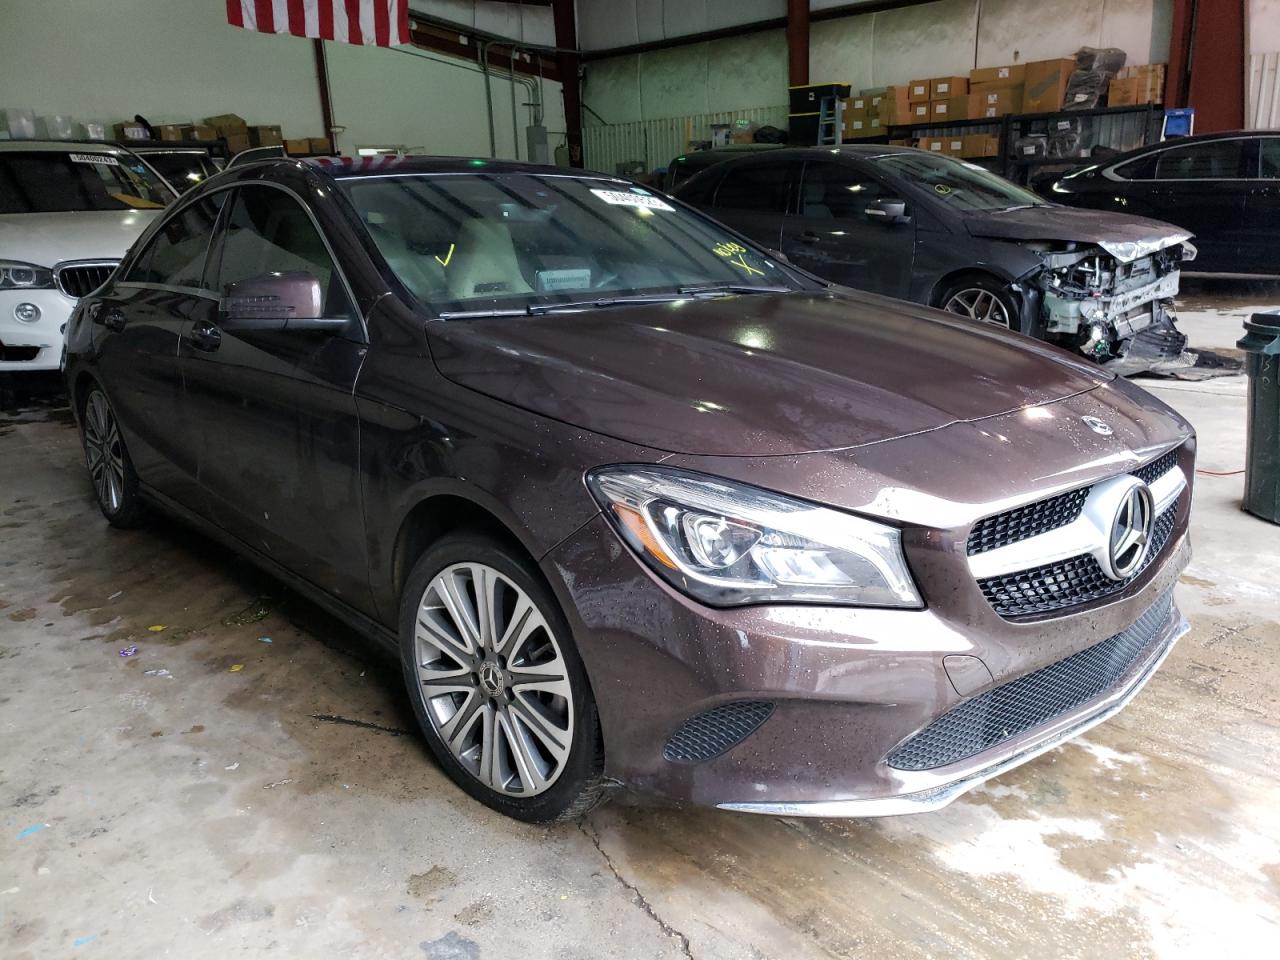 WDDSJ4GB1JN****** Salvage and Wrecked 2018 Mercedes-Benz CLA-Class in Alabama State